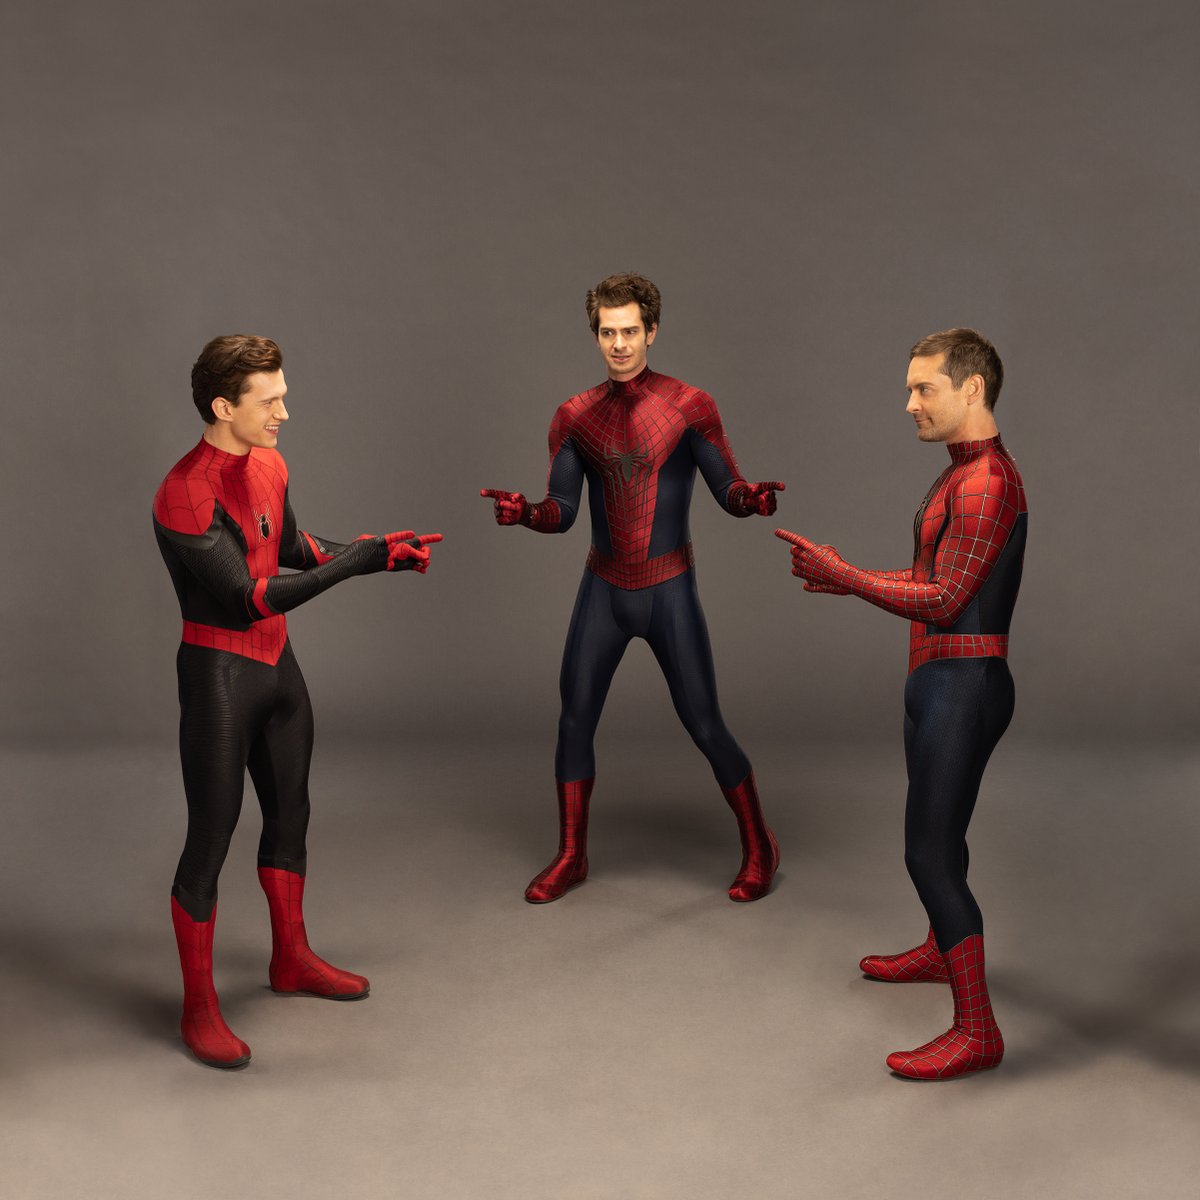 LtR, Tom Holland, Andrew Garfield, and Tobey Maguire point at each other, wearing their Spider-Man costumes but no masks, in imitation of the meme.